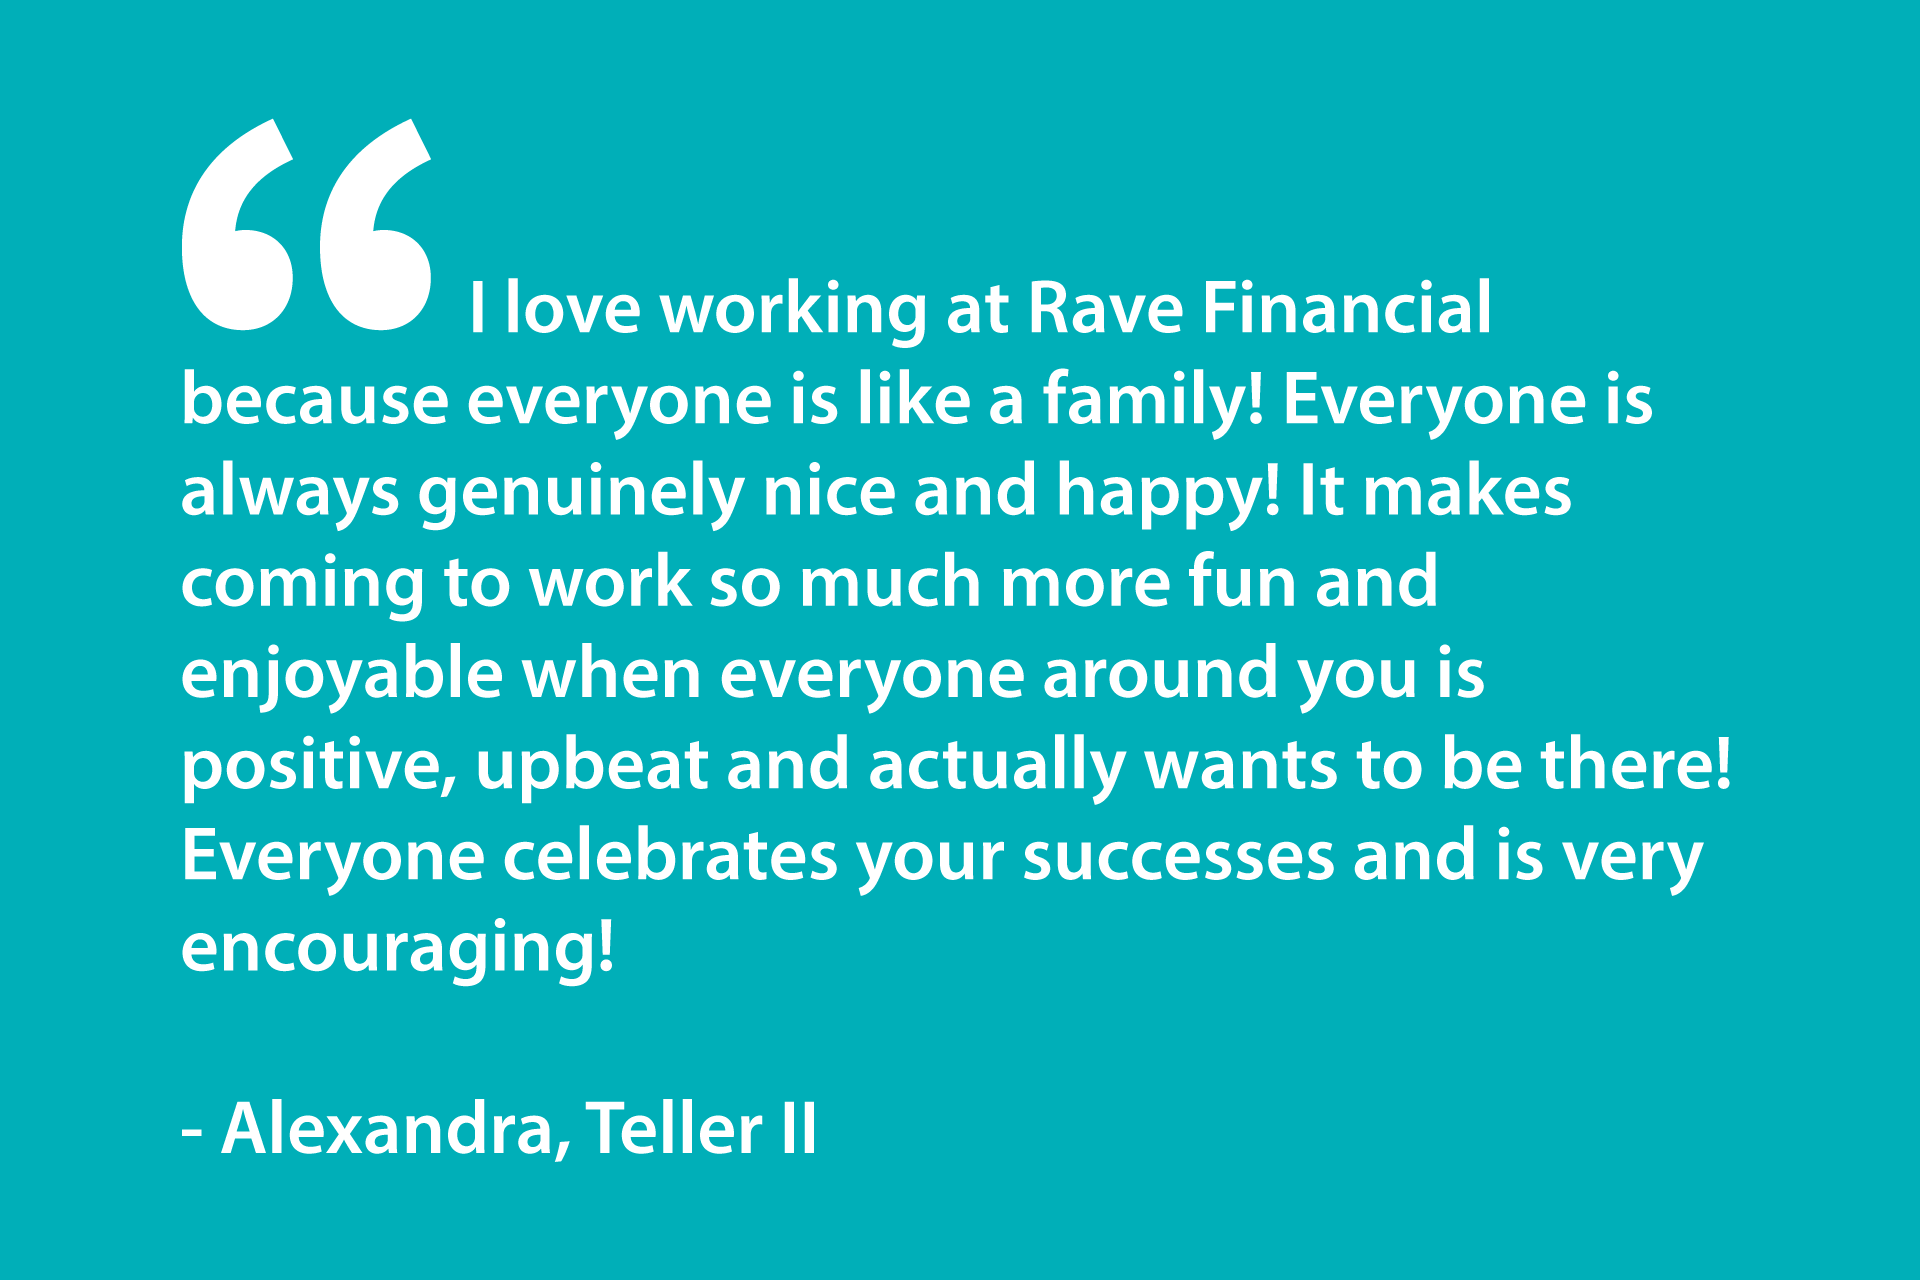 I love working at Rave Financial because everyone is like a family! Everyone is always genuinely nice and happy! It makes coming to work so much more fun and enjoyable when everyone around you is positive, upbeat and actually wants to be there! Everyone celebrates your successes and is very encouraging! - Alexandra, Teller II